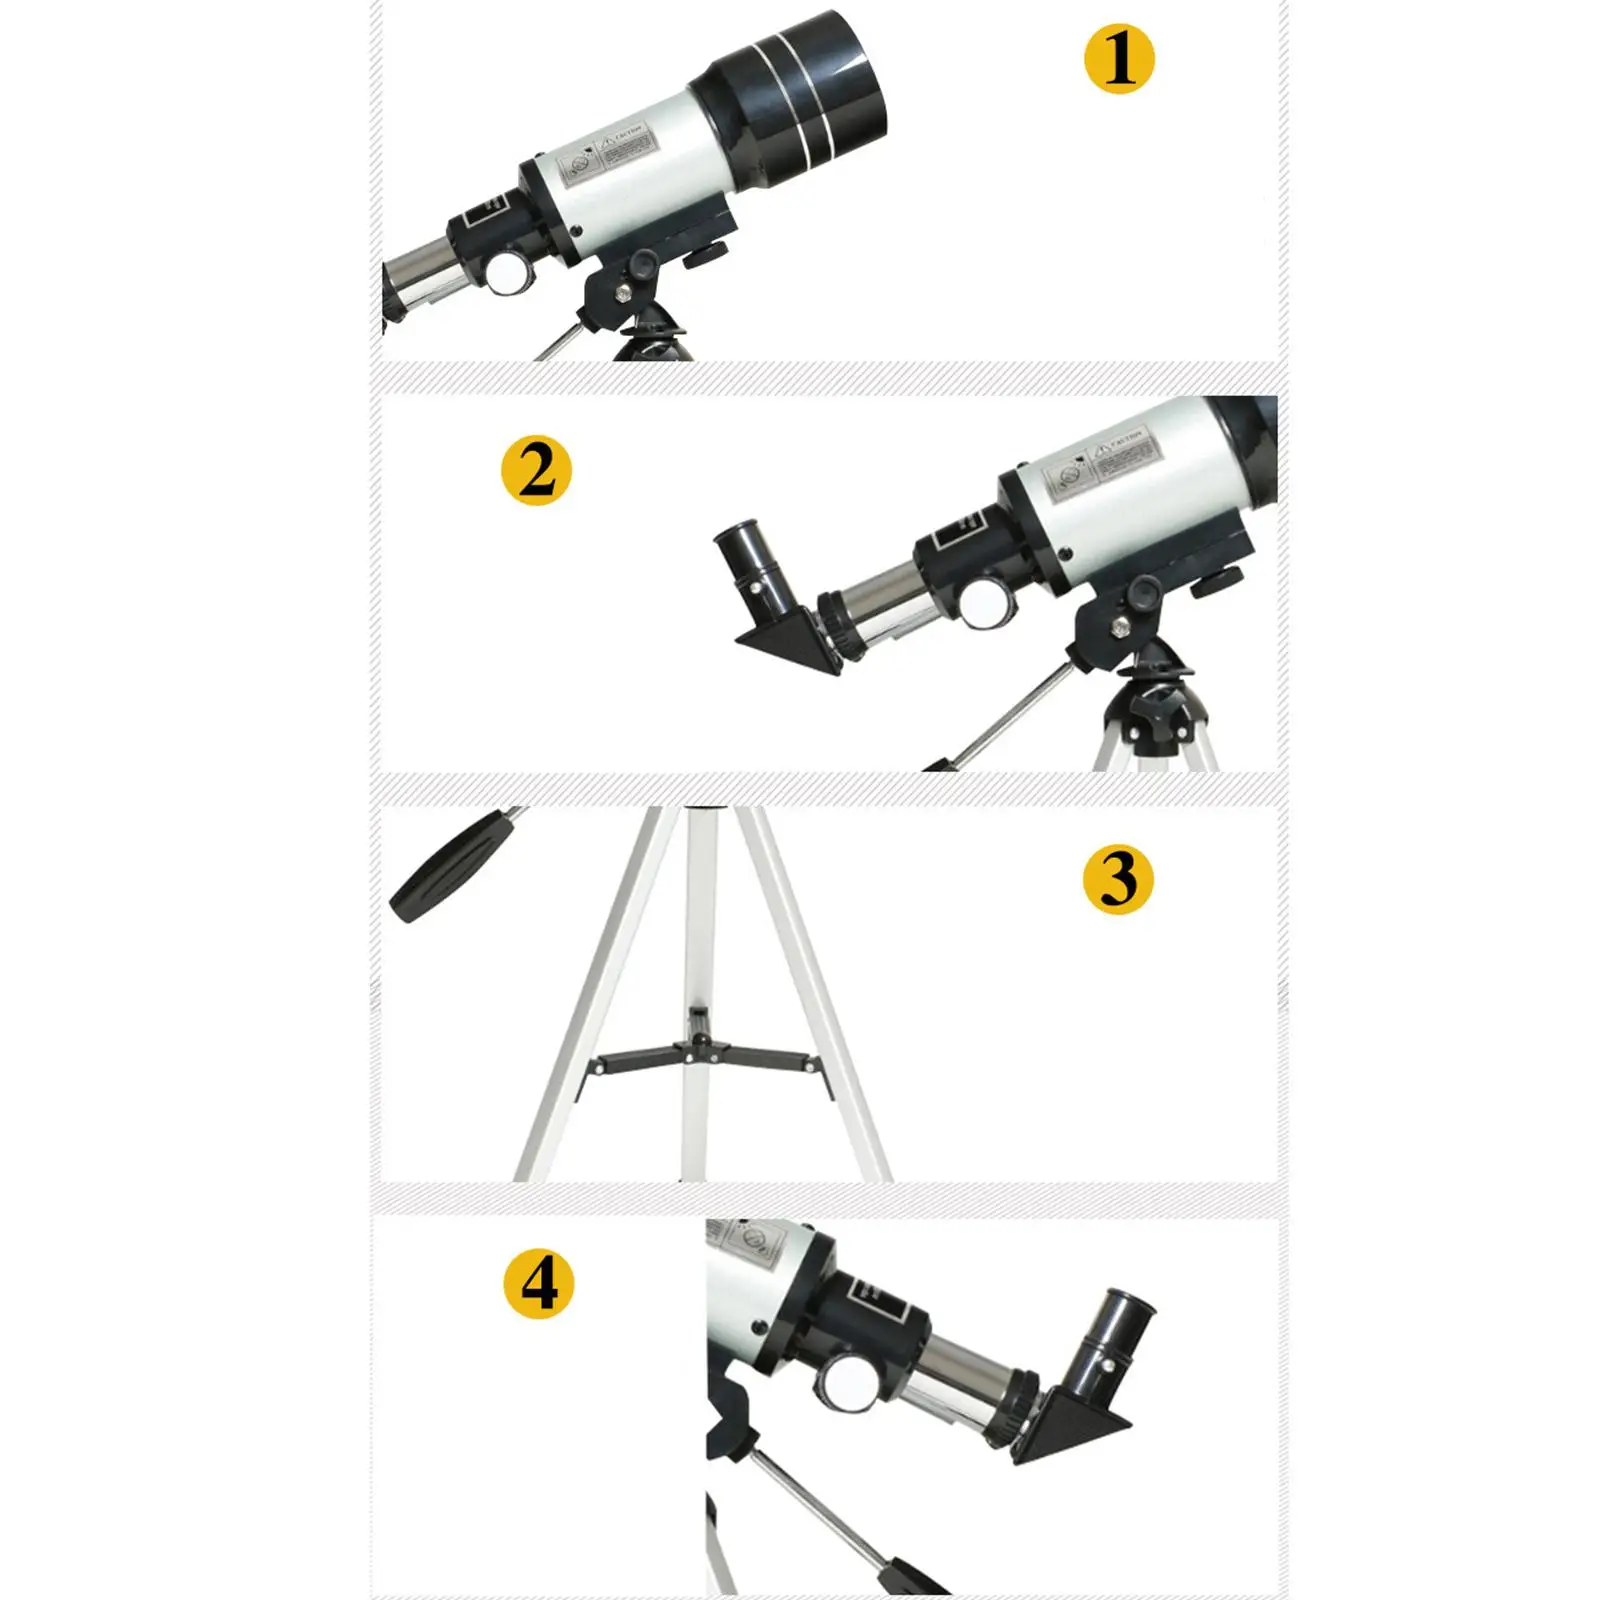 70mm 300mm Telescope with Tripod for Beginners ,to Watch Wildlife and Landscapes